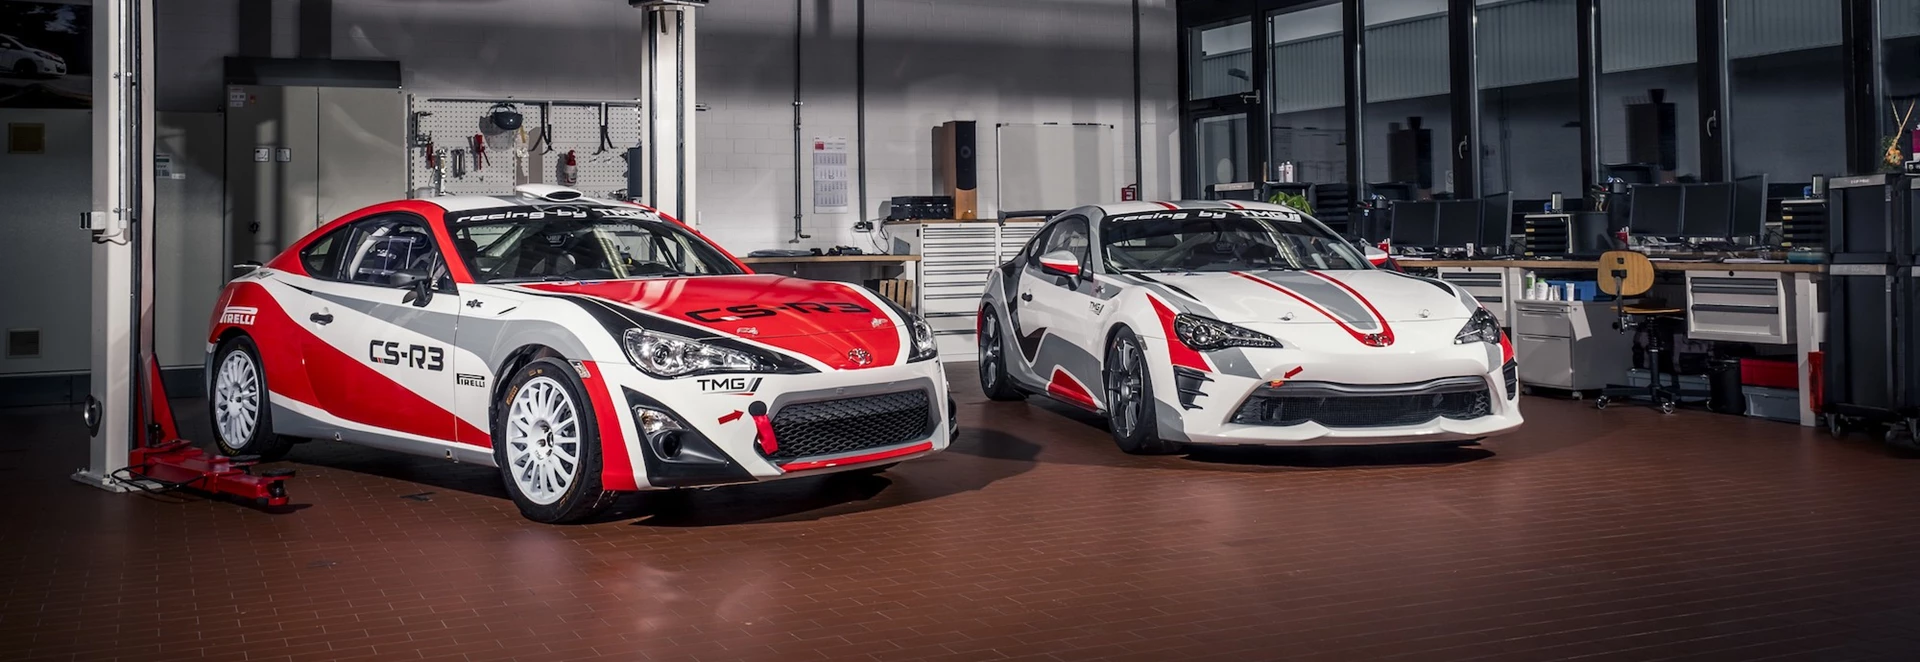 Toyota launches GT86 racing series